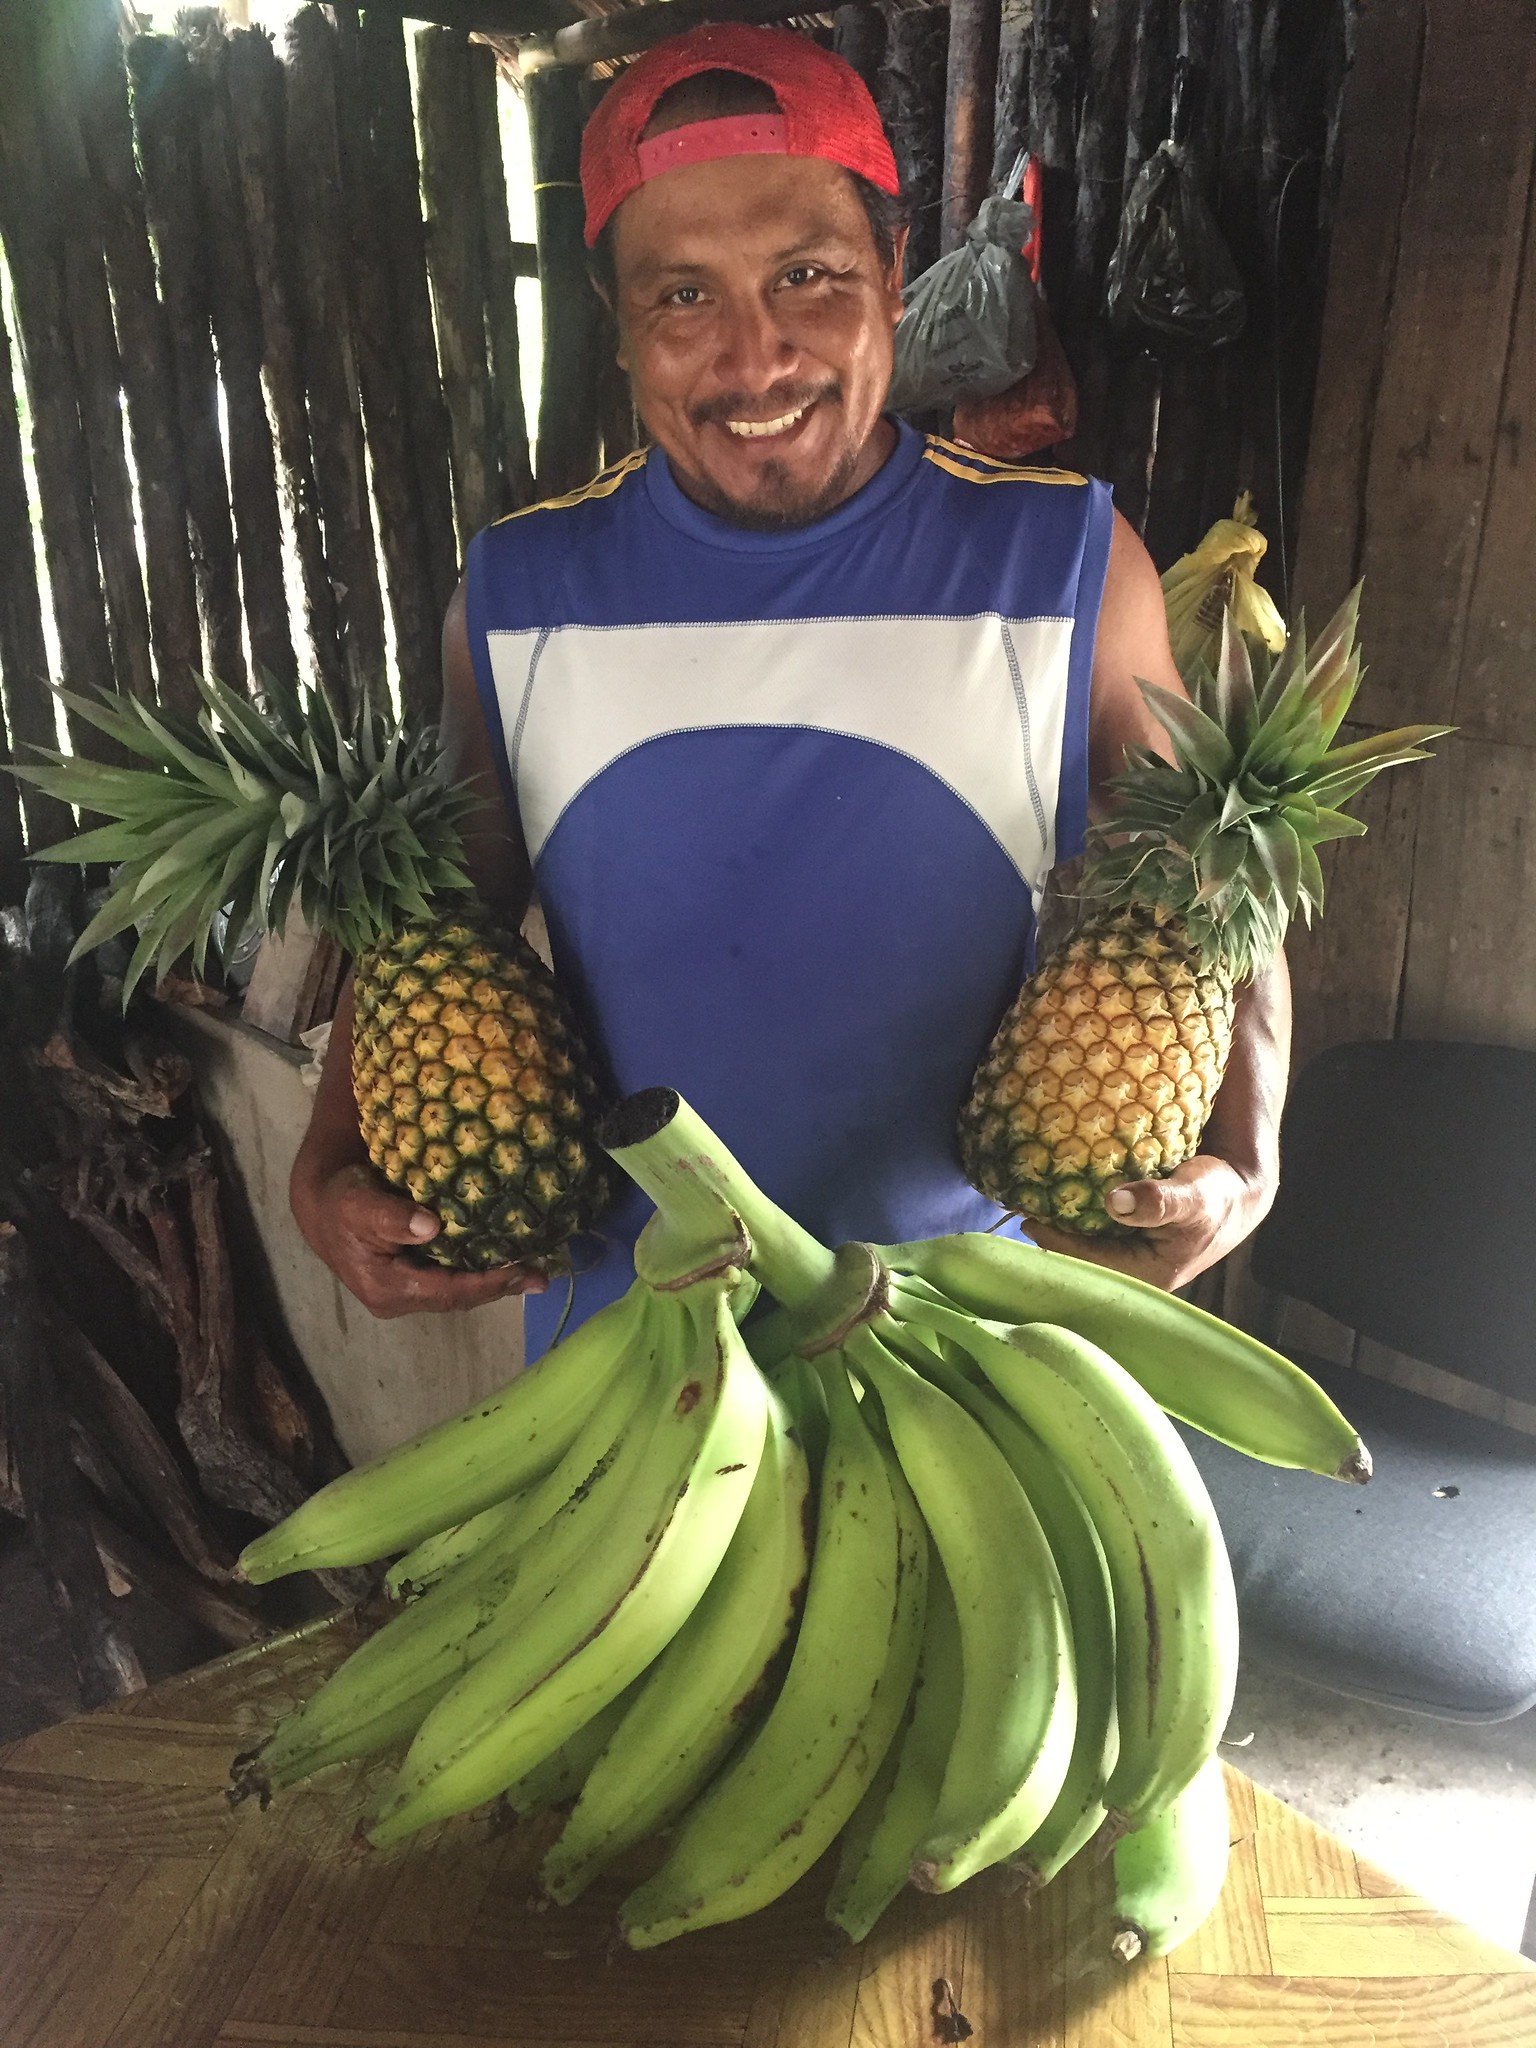 Smiling from ear to ear, Montiel displays recently-harvested pineapples and plantains